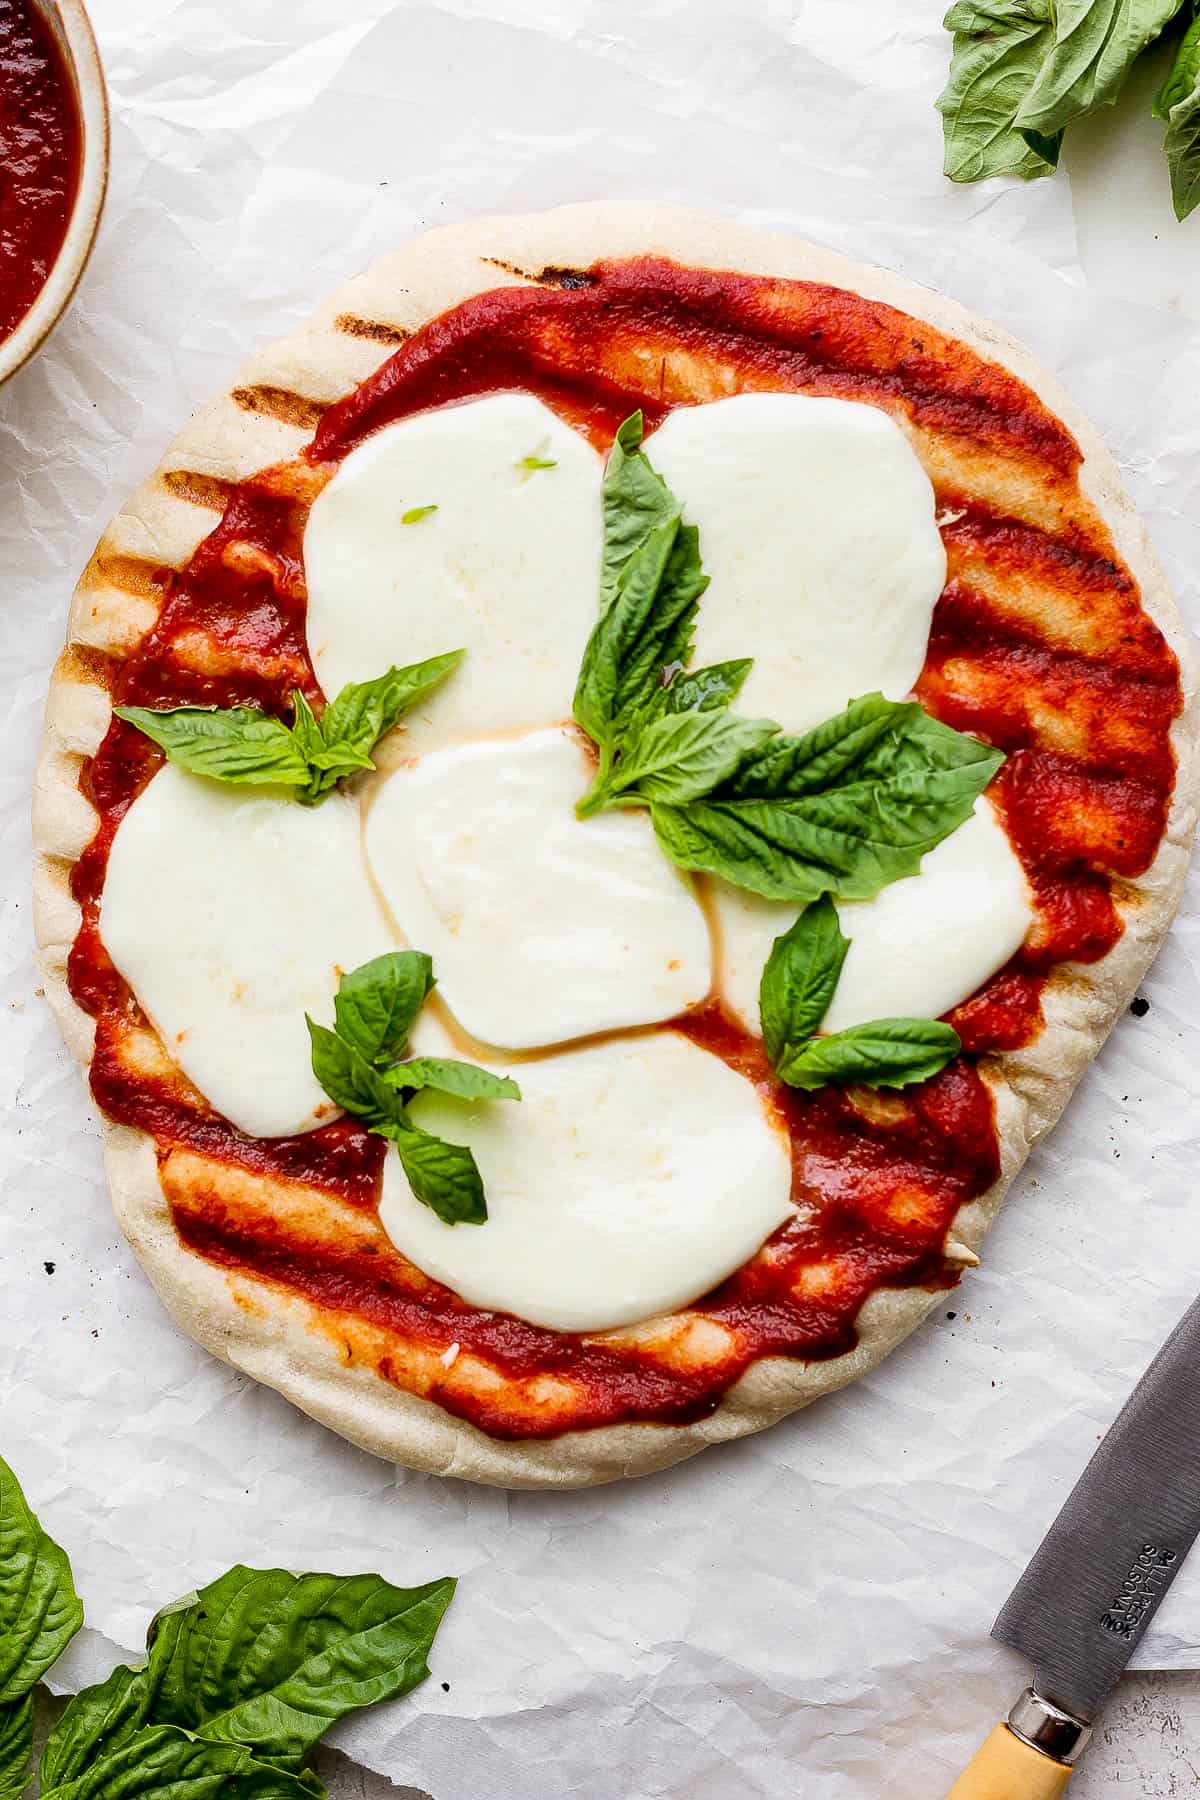 A fully cooked grilled margherita pizza.